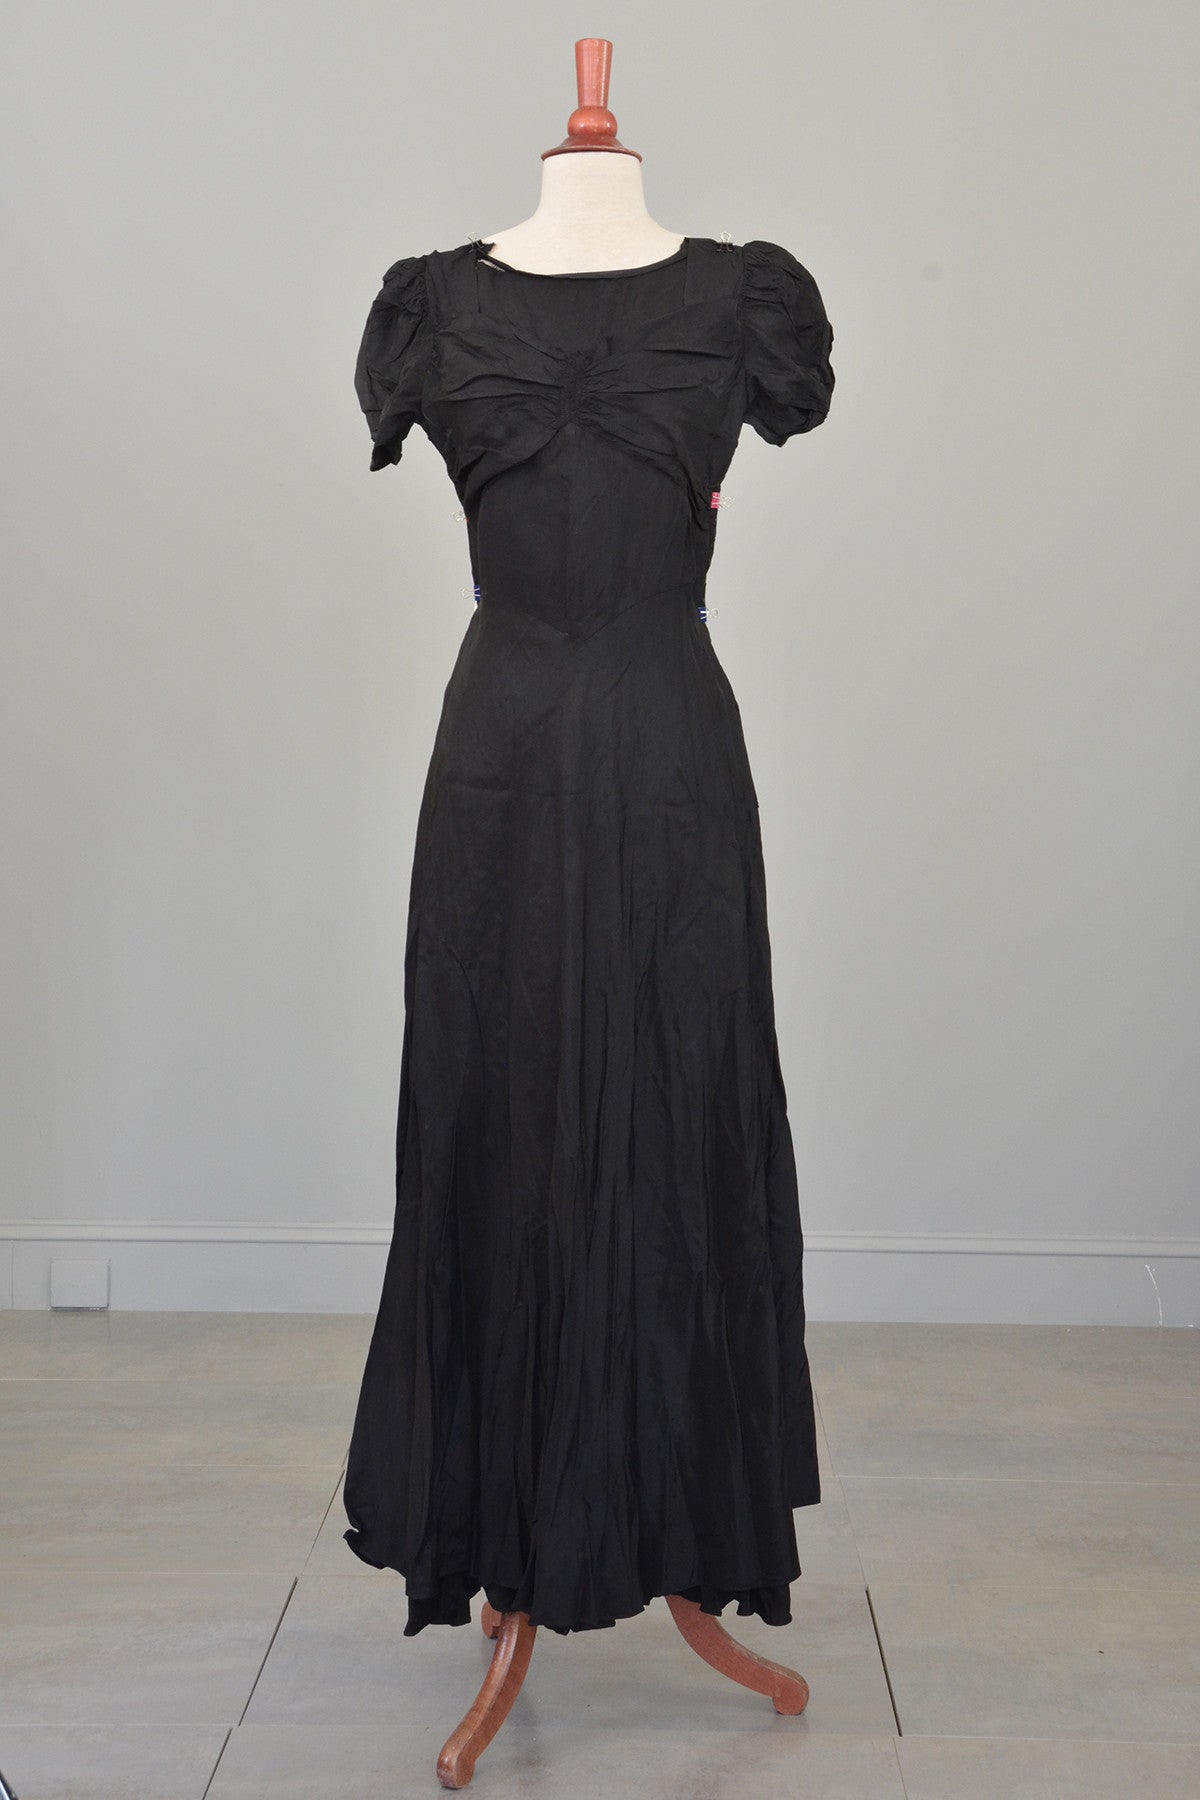 1930s 40s Black Cascading Ruffles Gown / Underslip for Study or Restoration